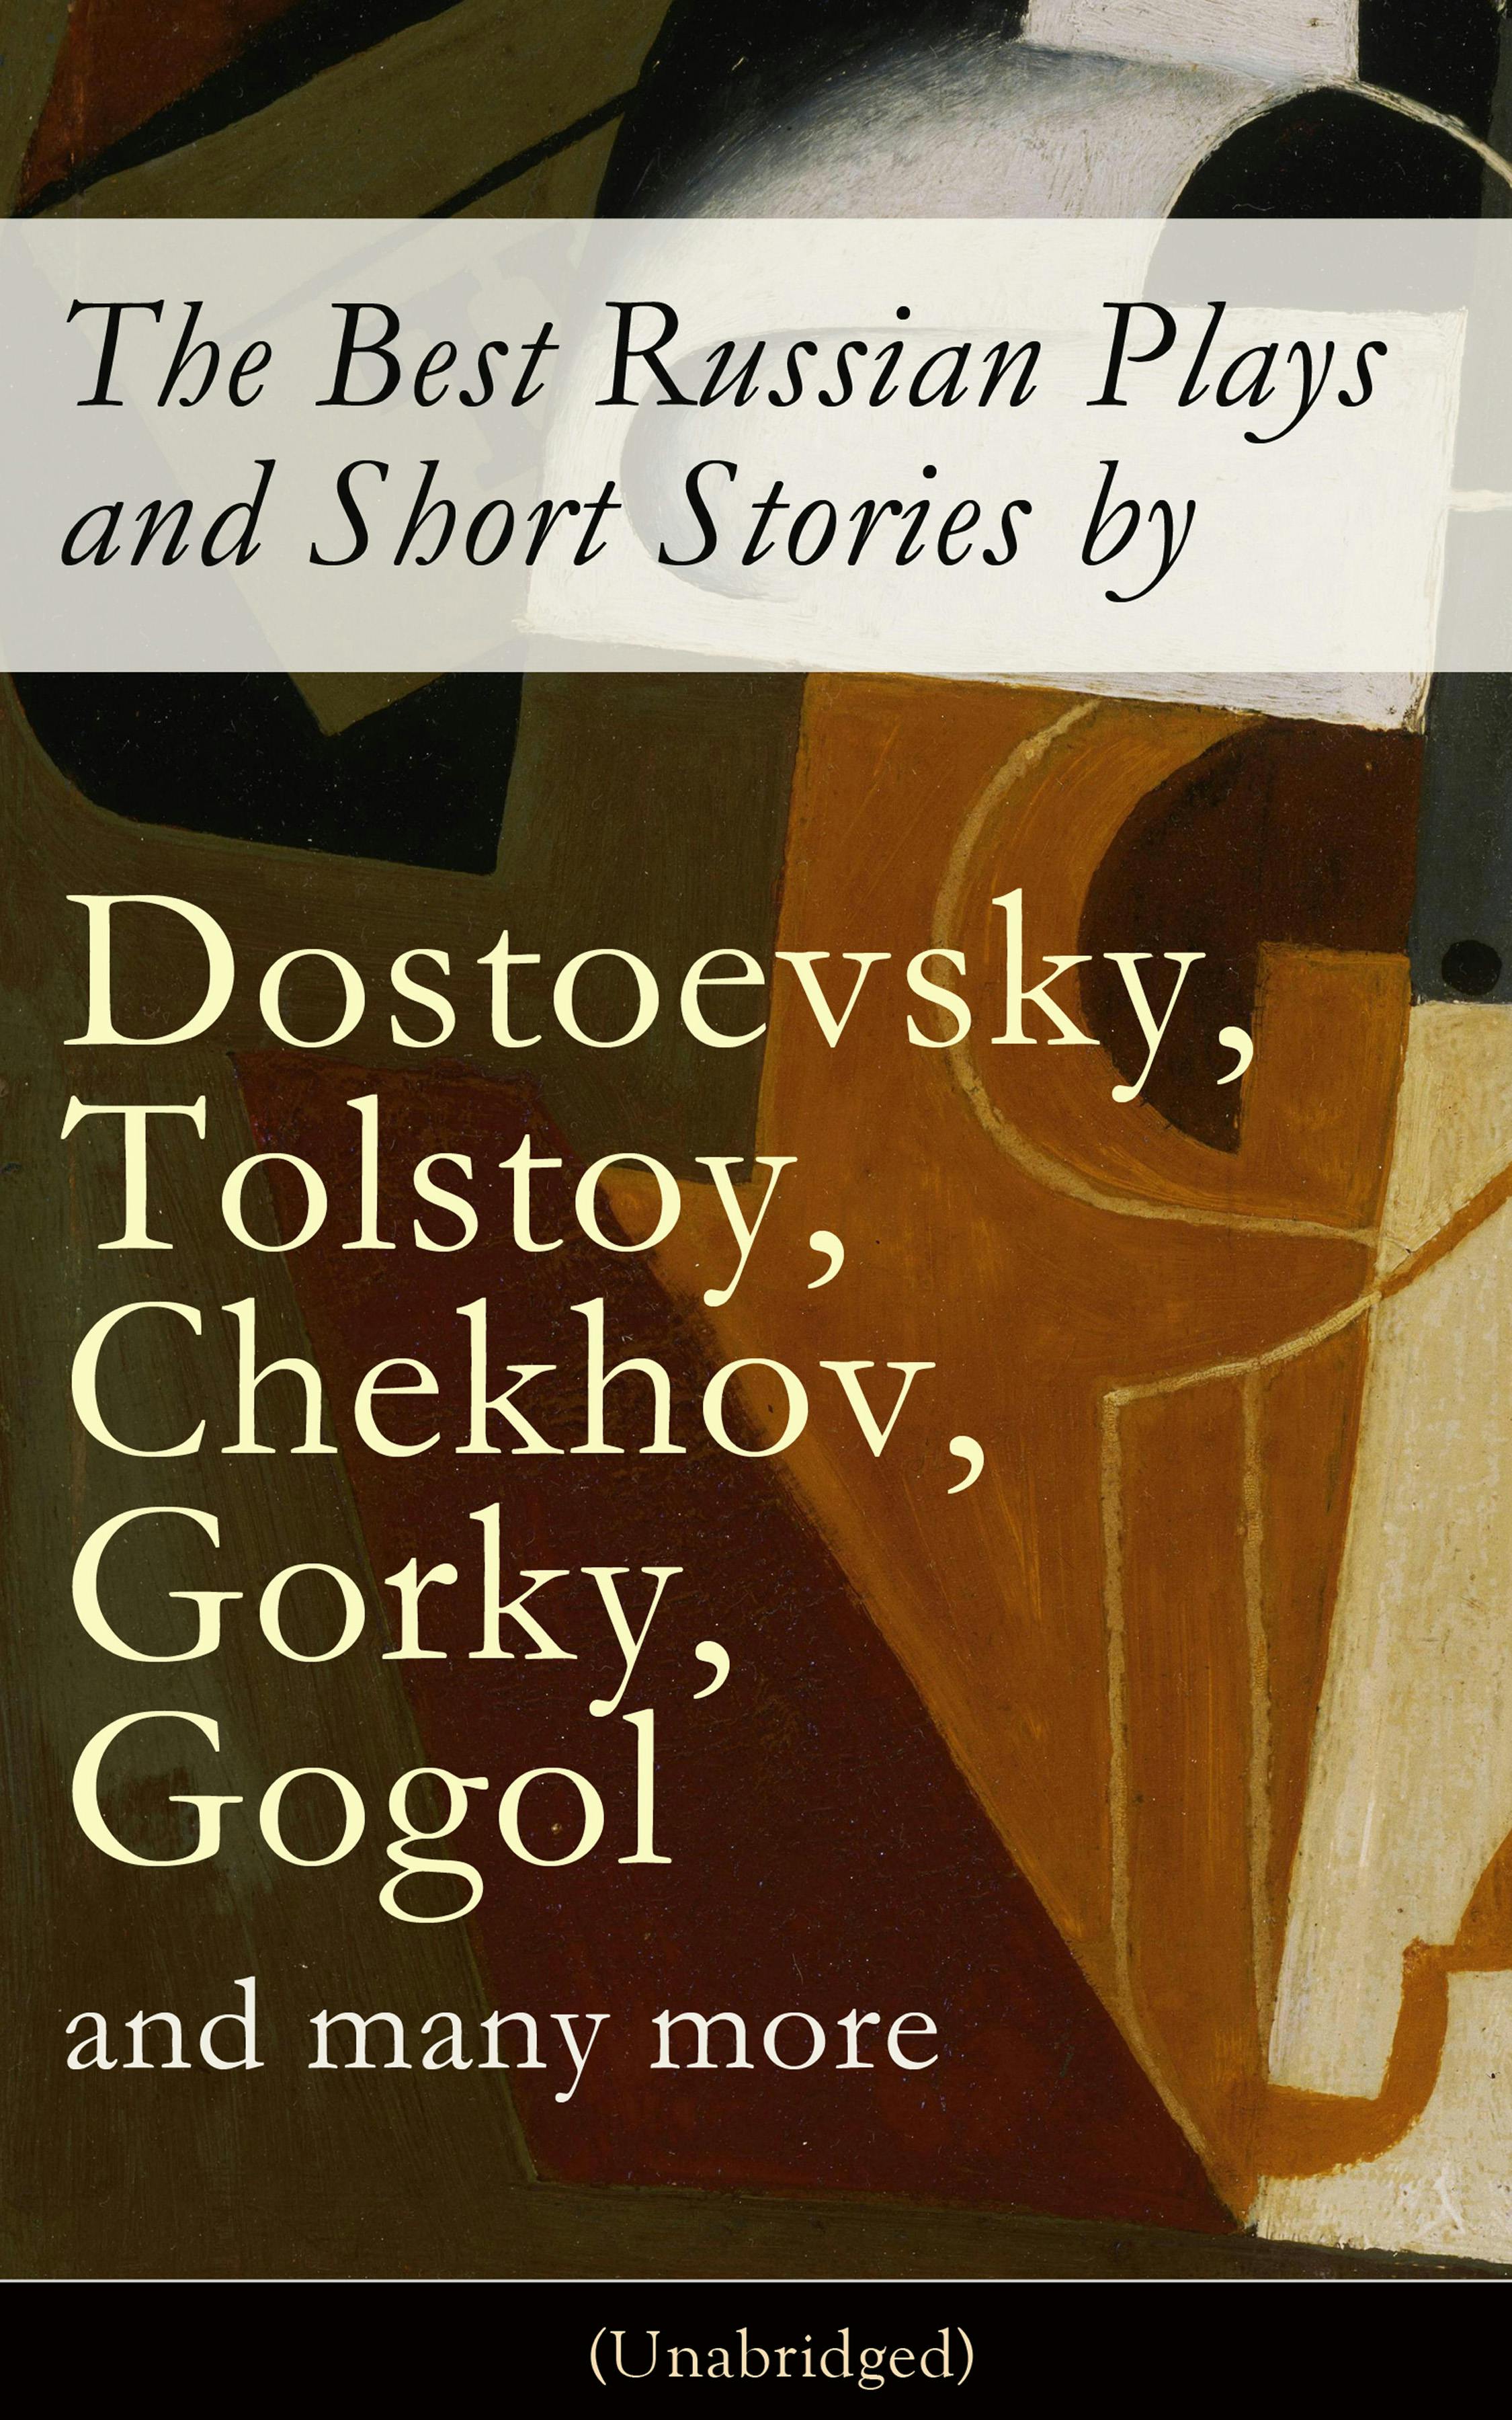 The Best Russian Plays and Short Stories by Dostoevsky, Tolstoy, Chekhov, Gorky, Gogol and many more (Unabridged): An All Time Favorite Collection from the Renowned Russian dramatists and Writers (Including Essays and Lectures on Russian Novelists) - M.Y. Saltykov, S.T. Semyonov, L.N. Andreyev, M.P. Artzybashev, William Lyon Phelps, Maxim Gorky, A.S. Pushkin, V.G. Korolenko, Anton Chekhov, K. Sologub, N.V. Gogol, F.M. Dostoyevsky, L.N. Tolstoy, A.I. Kuprin, I.S. Turgenev, V.N. Garshin, I.N. Potapenko